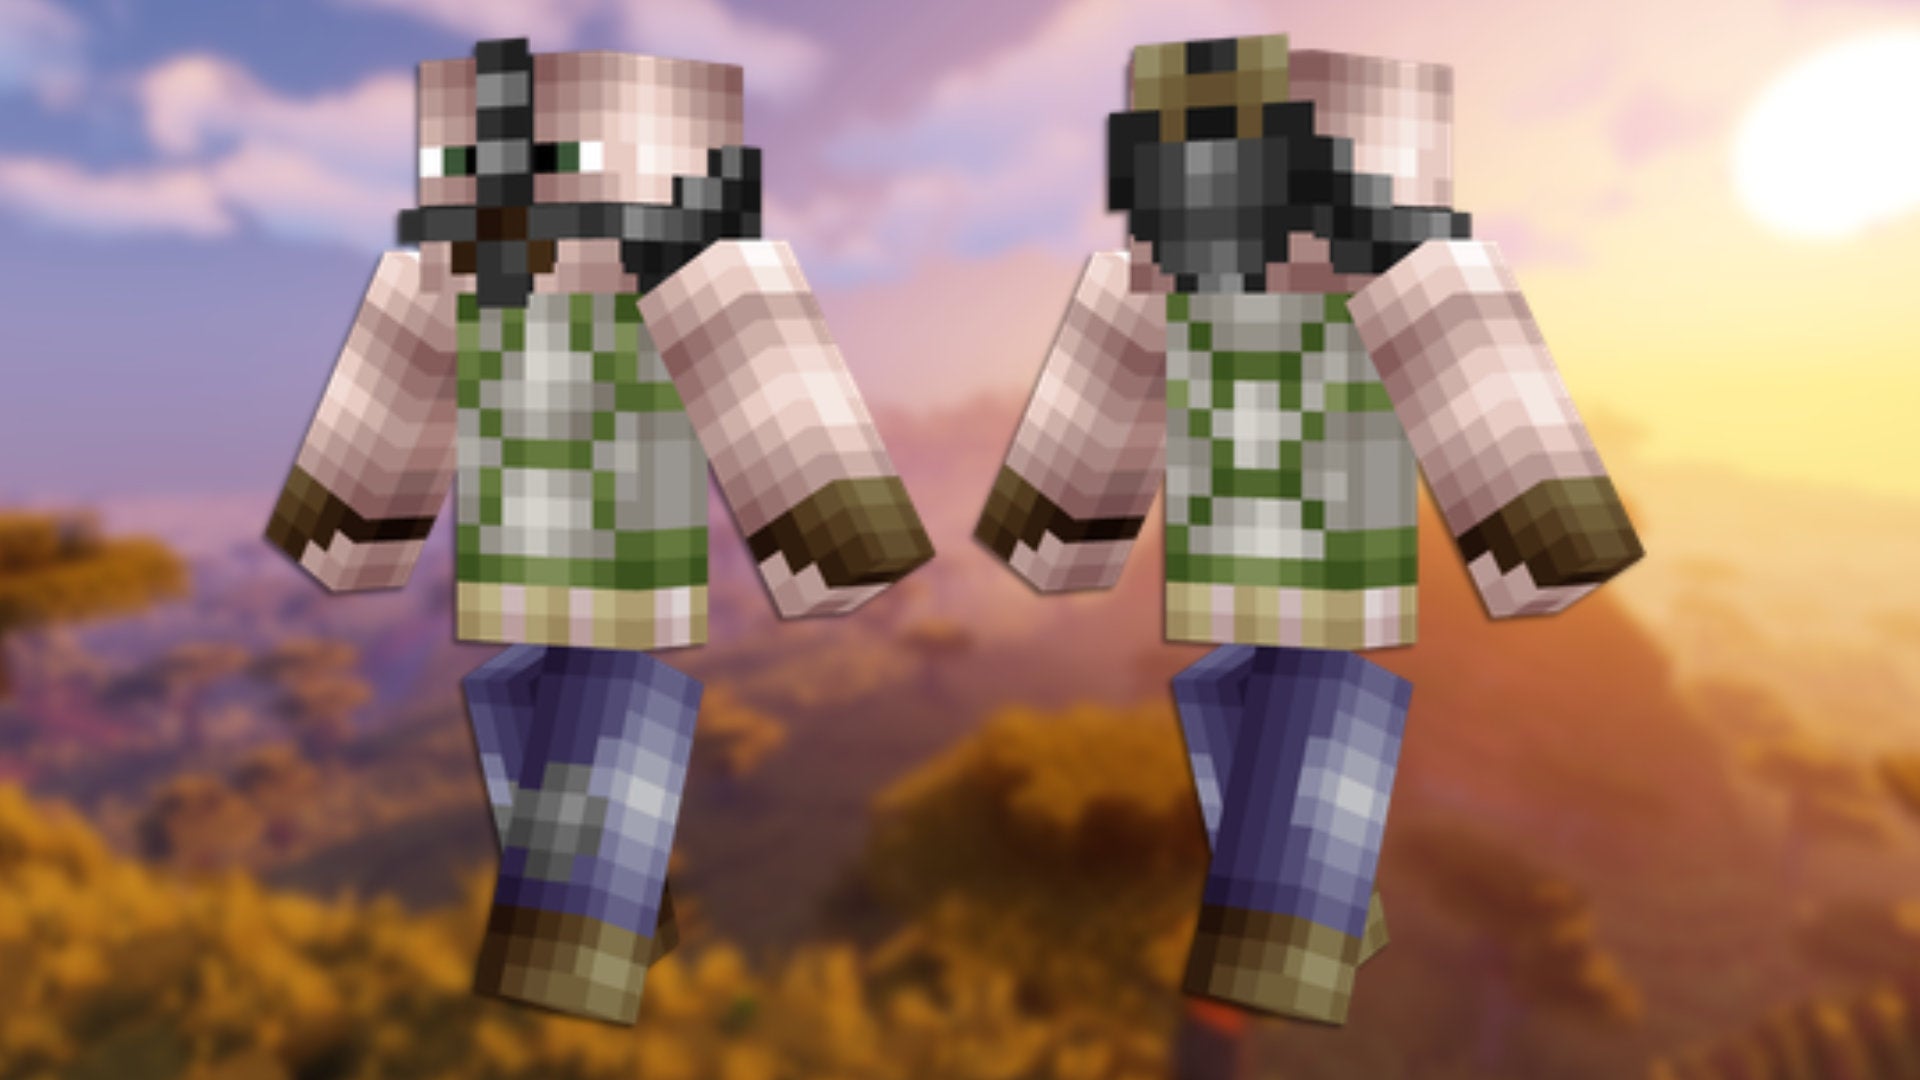 A front and back view of the Bane Minecraft skin.